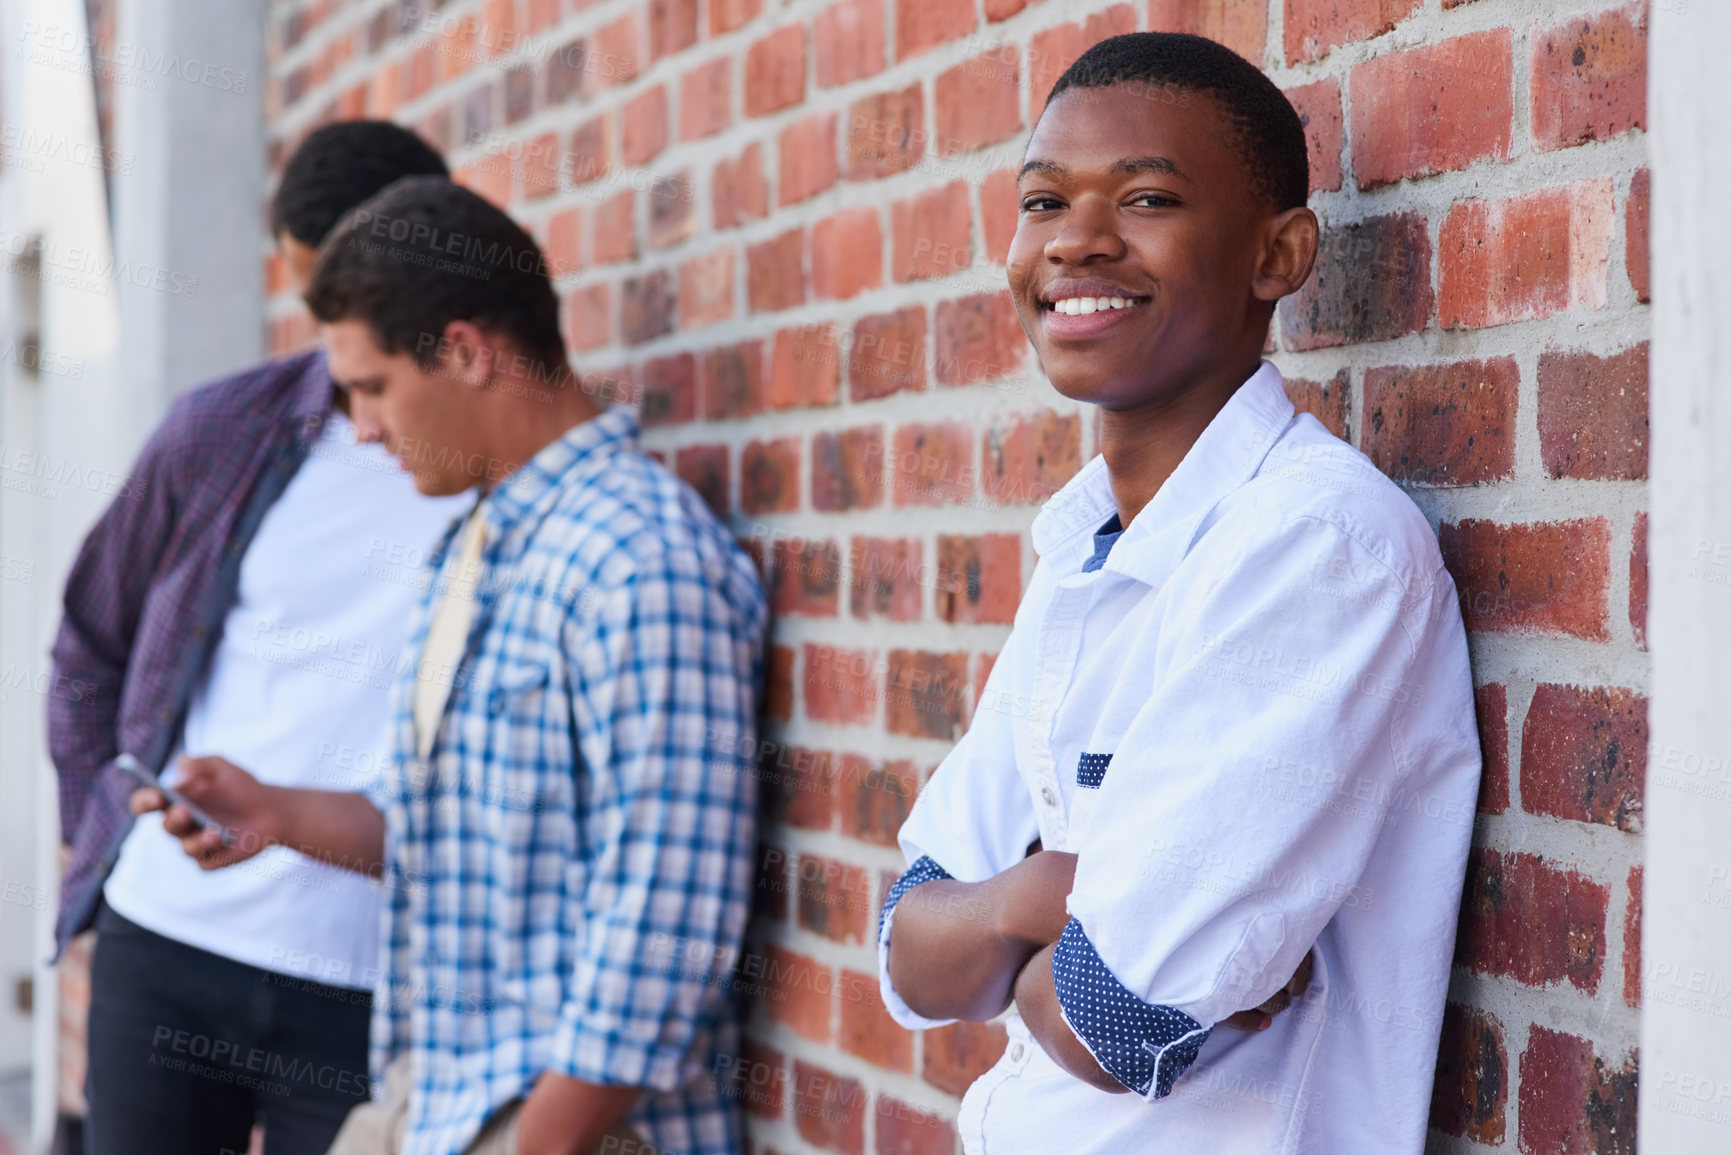 Buy stock photo Portrait of a university student on campus with his friends in the background